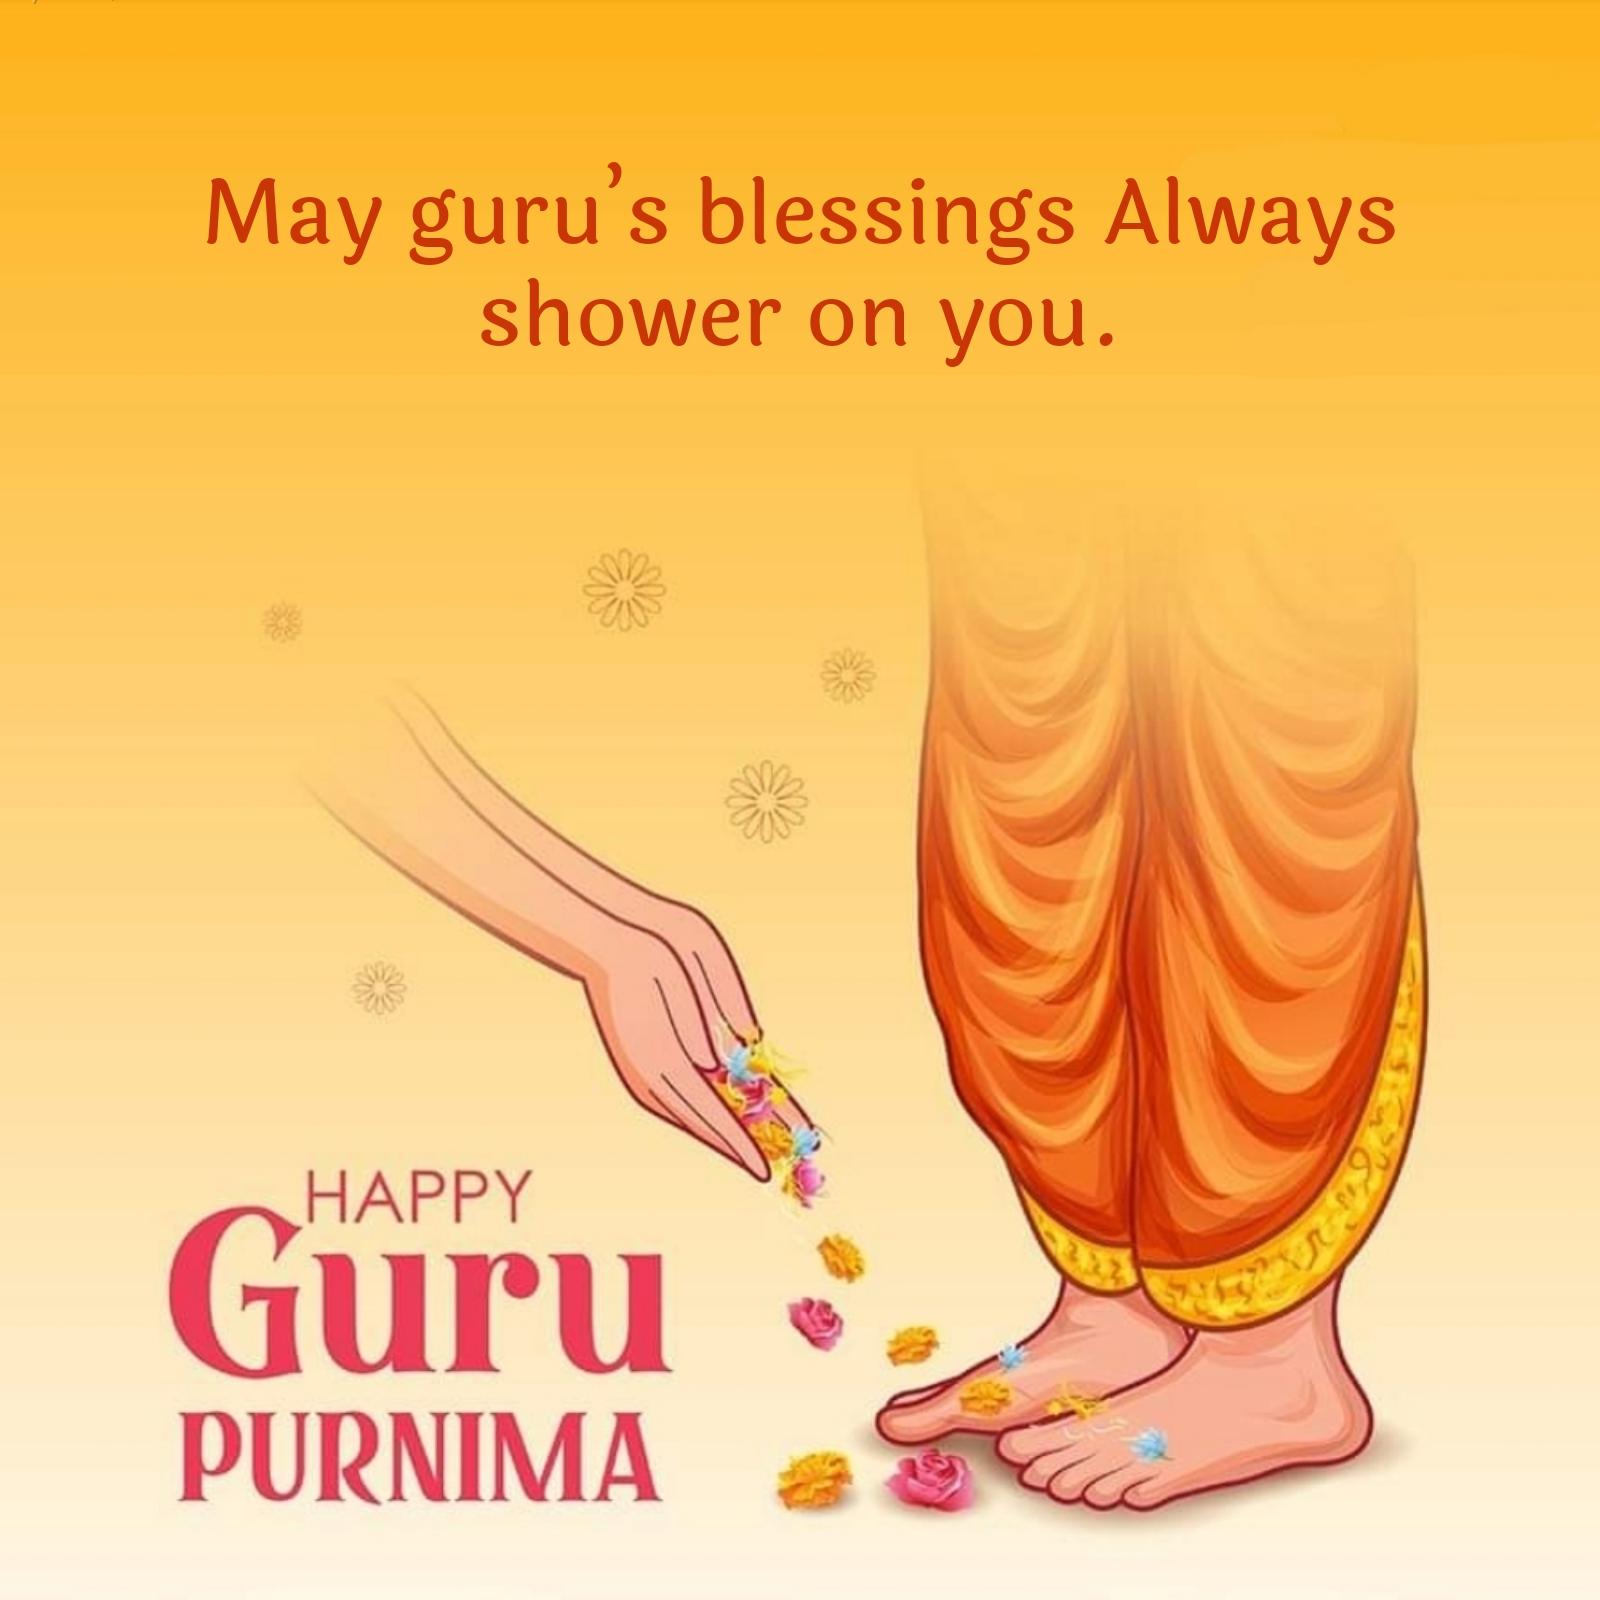 May gurus blessings Always shower on you